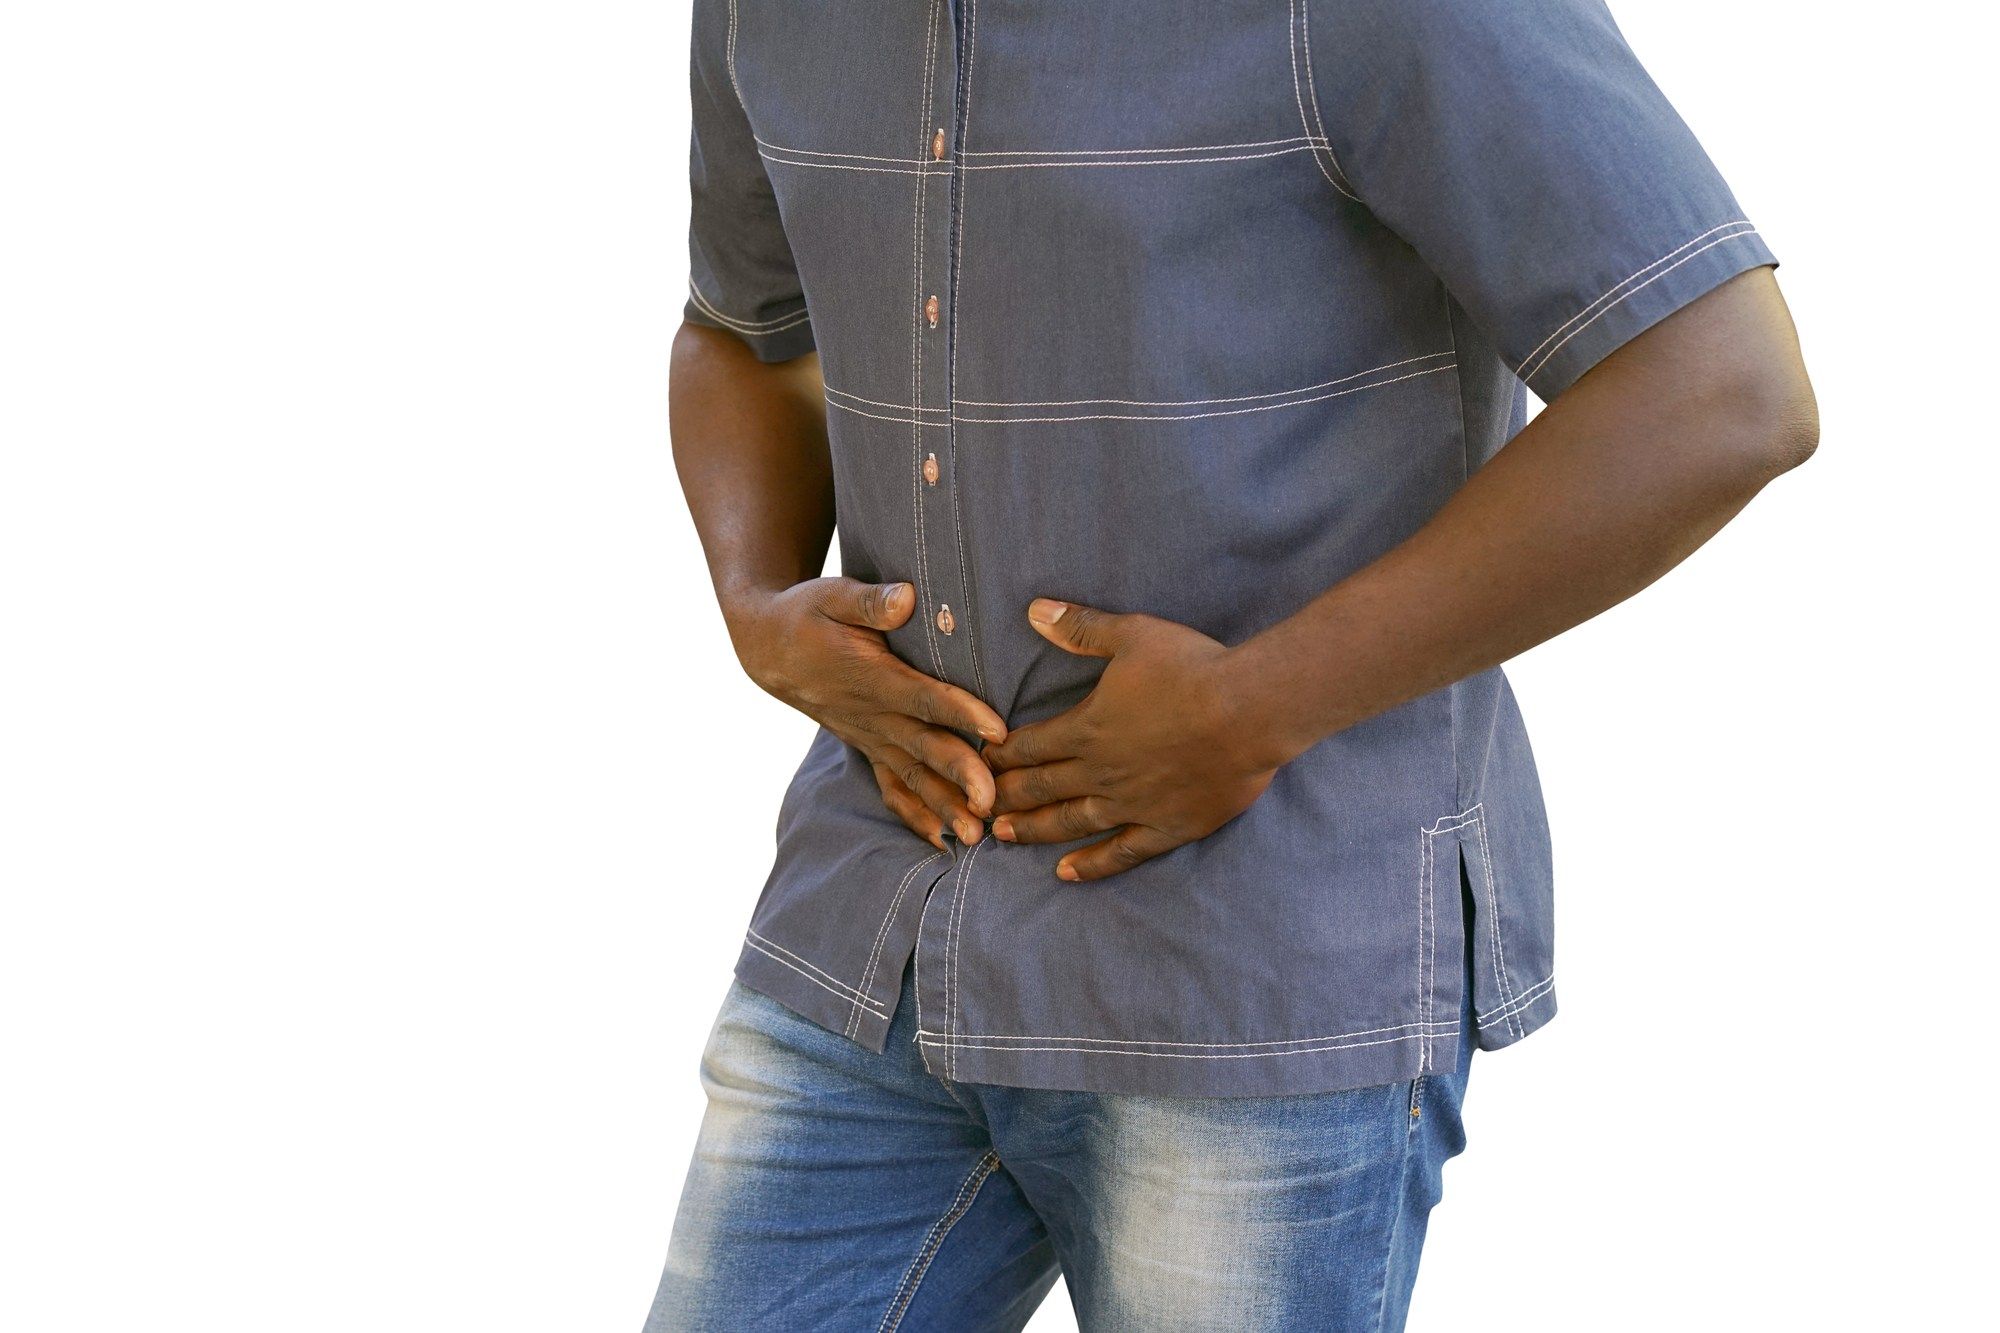 Man with abdominal pain